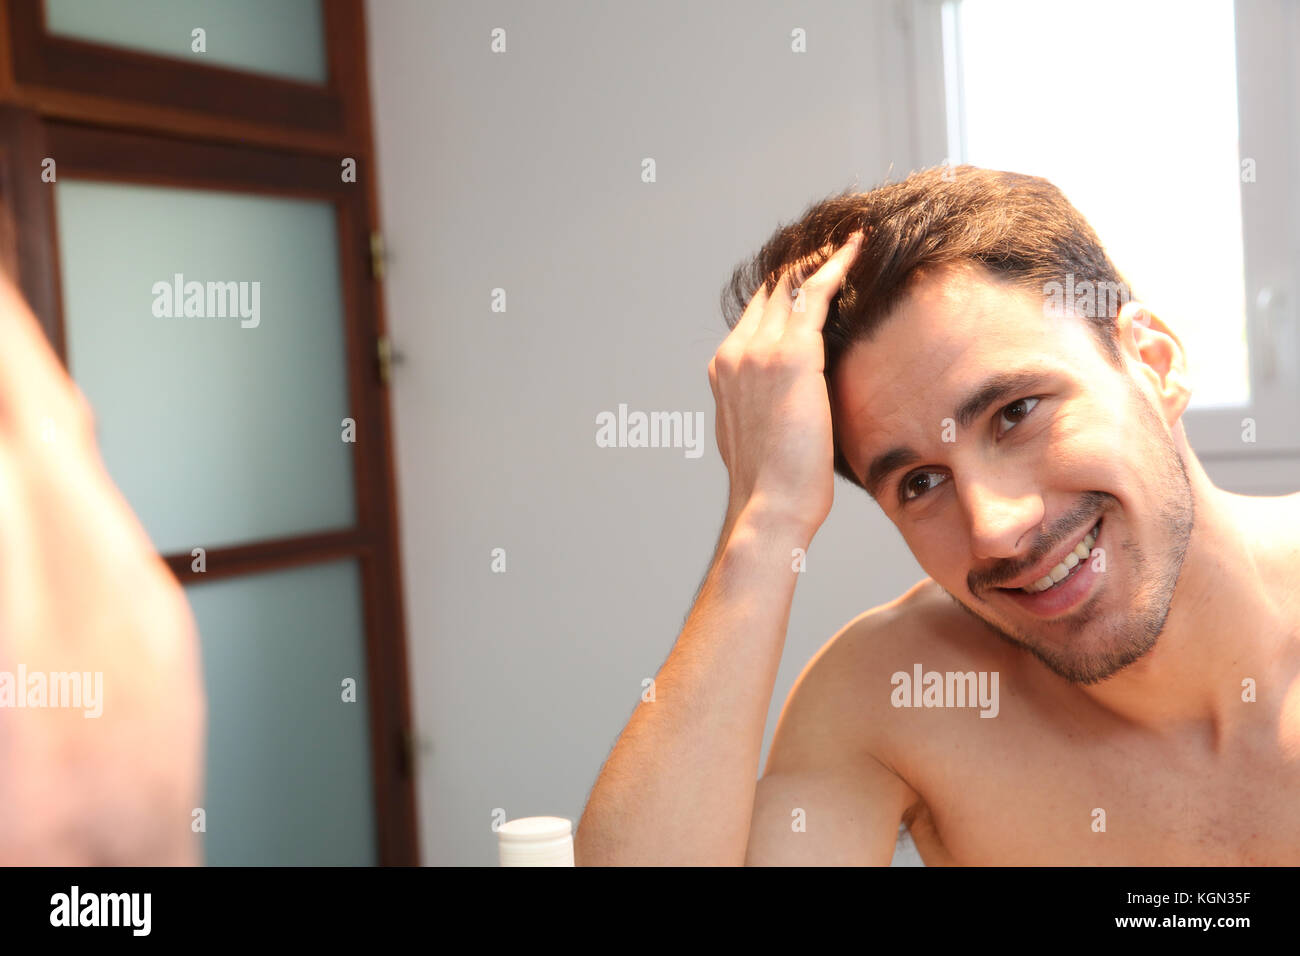 Young man looking at hair in mirror Stock Photo